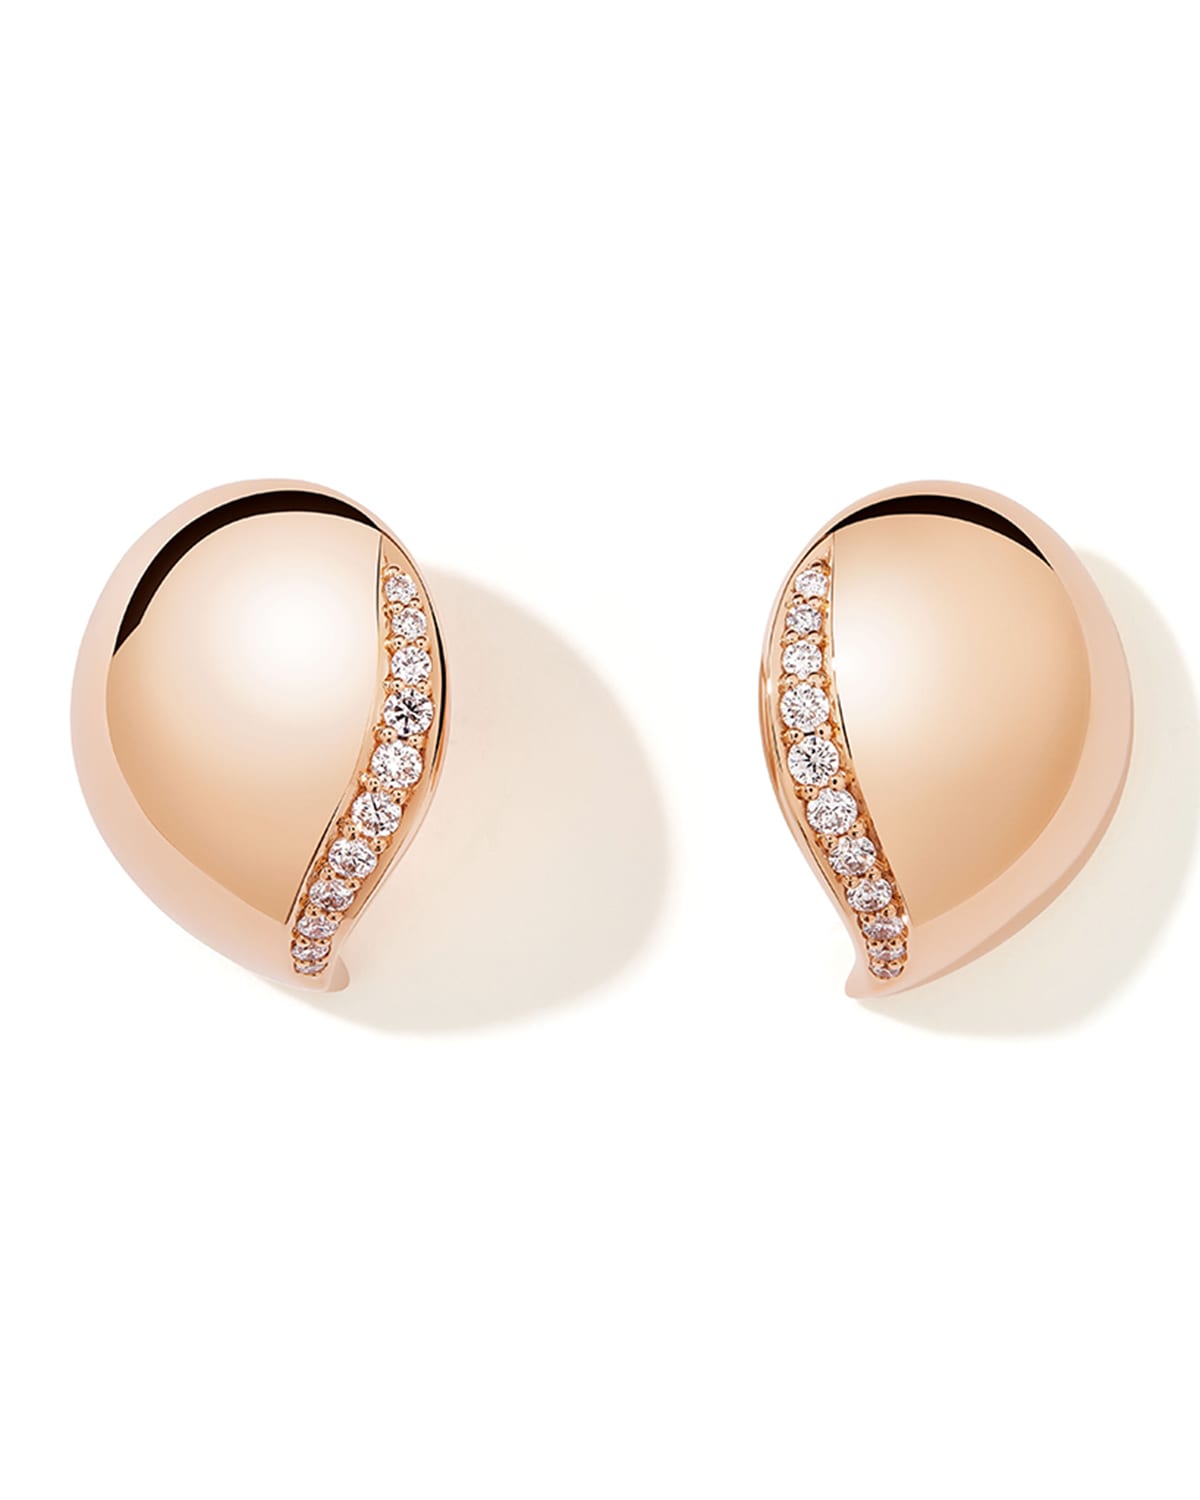 18k Rose Gold Signature Wave Earrings with Diamonds